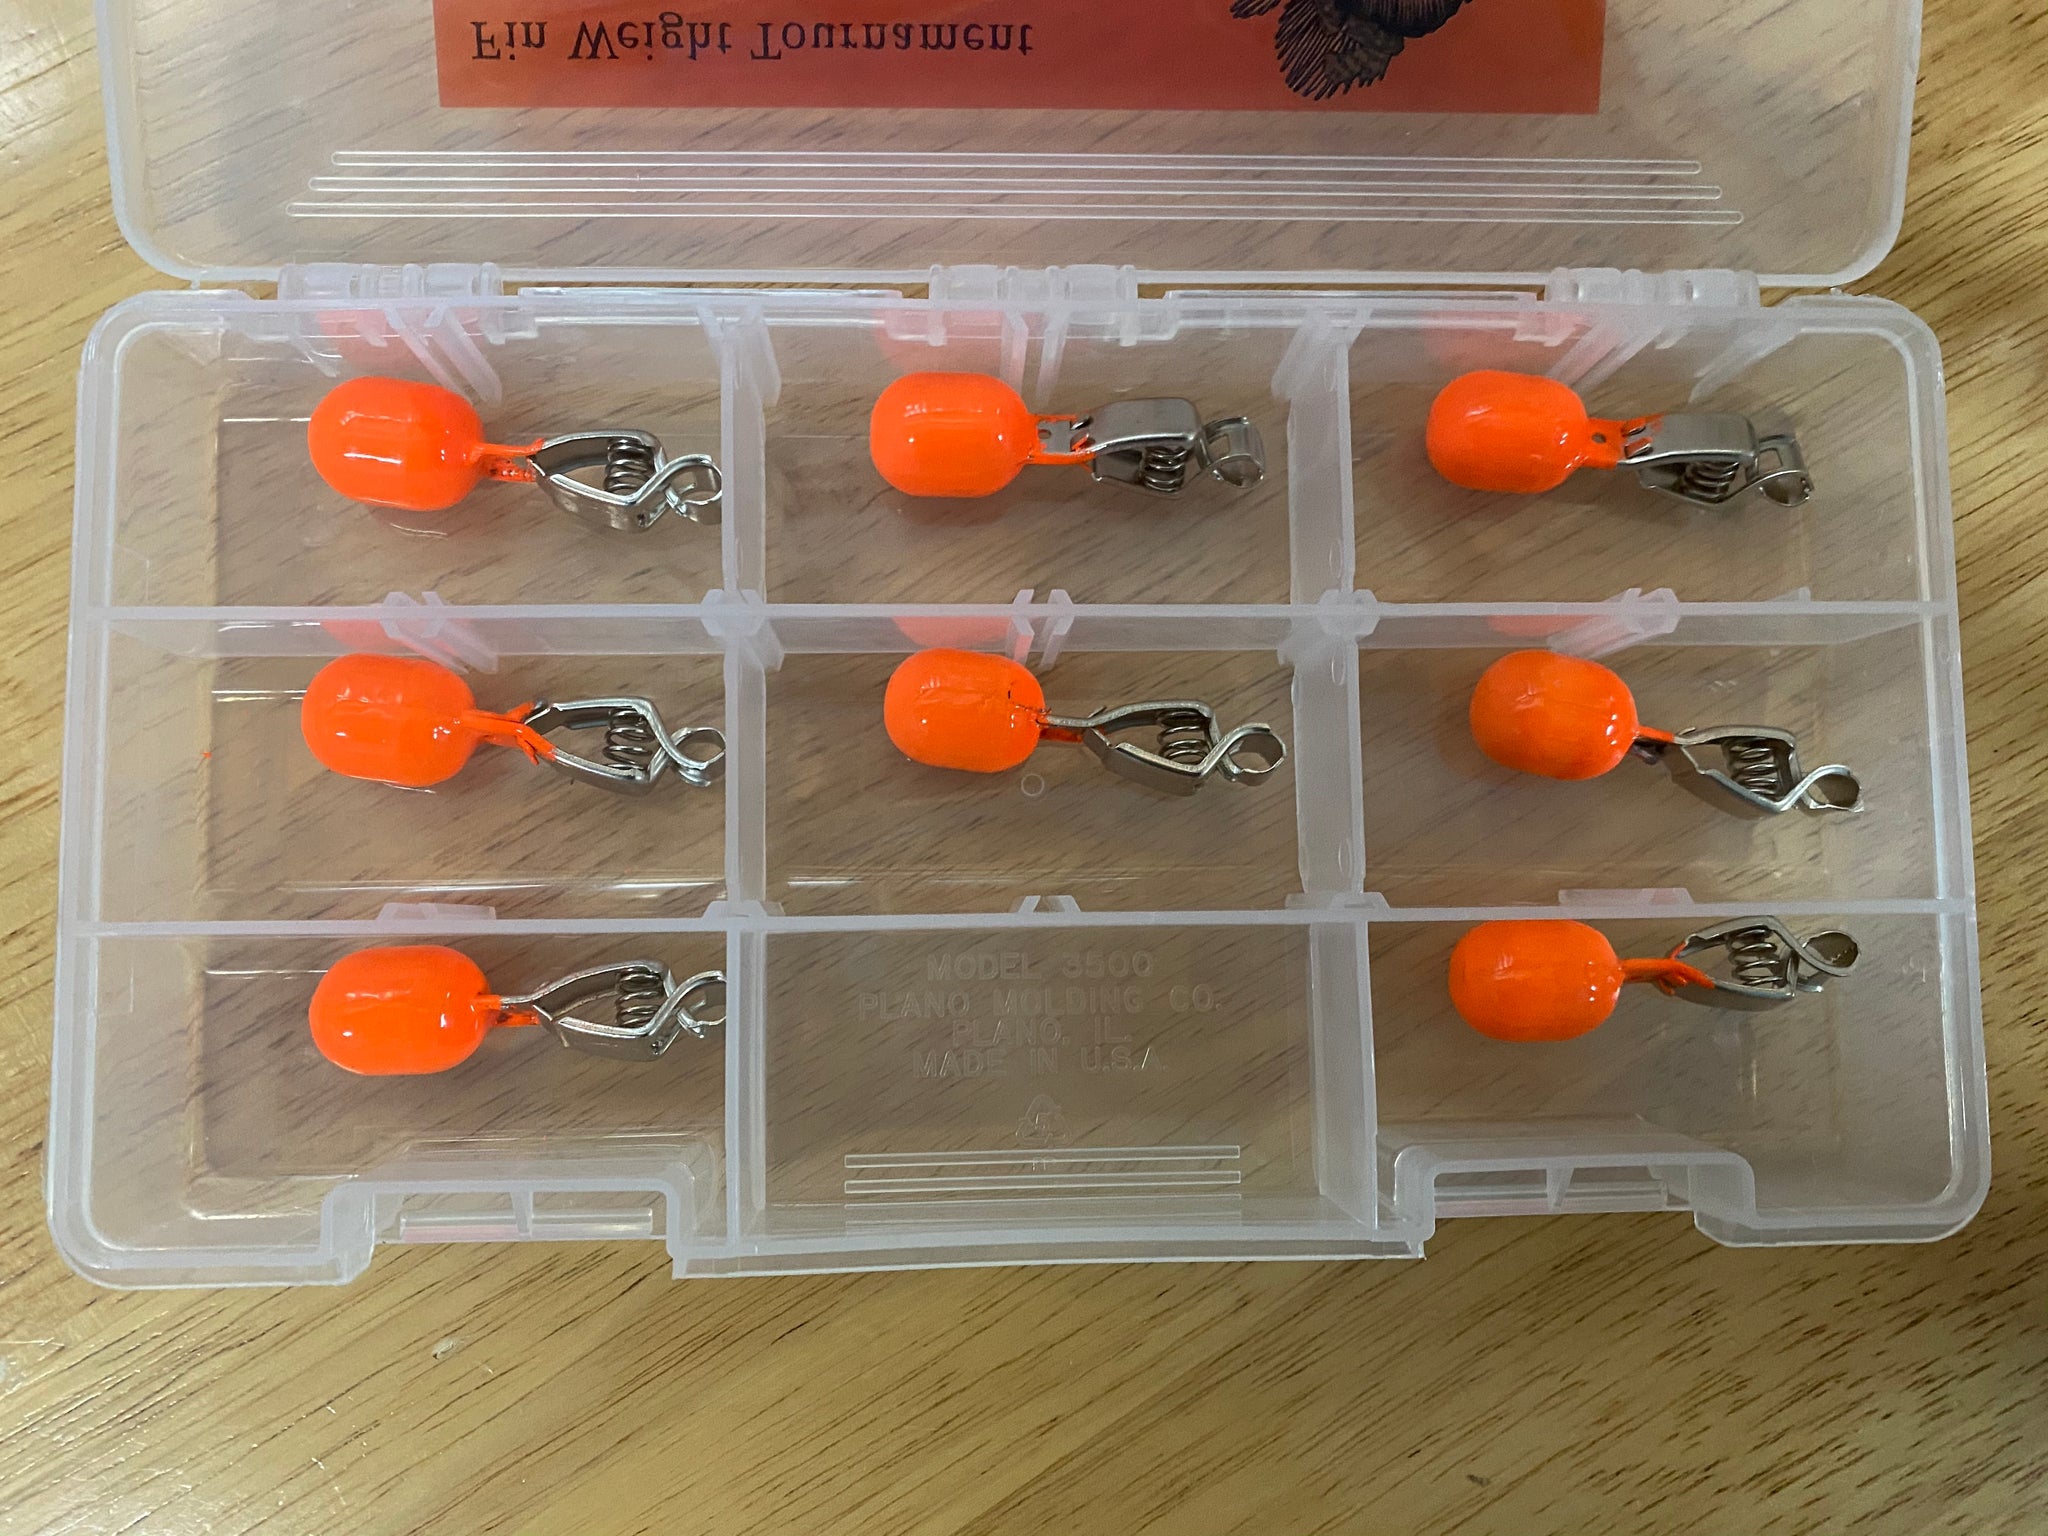 Thump Crappie Co. belly/Fin Weights – THUMP CRAPPIE CO.